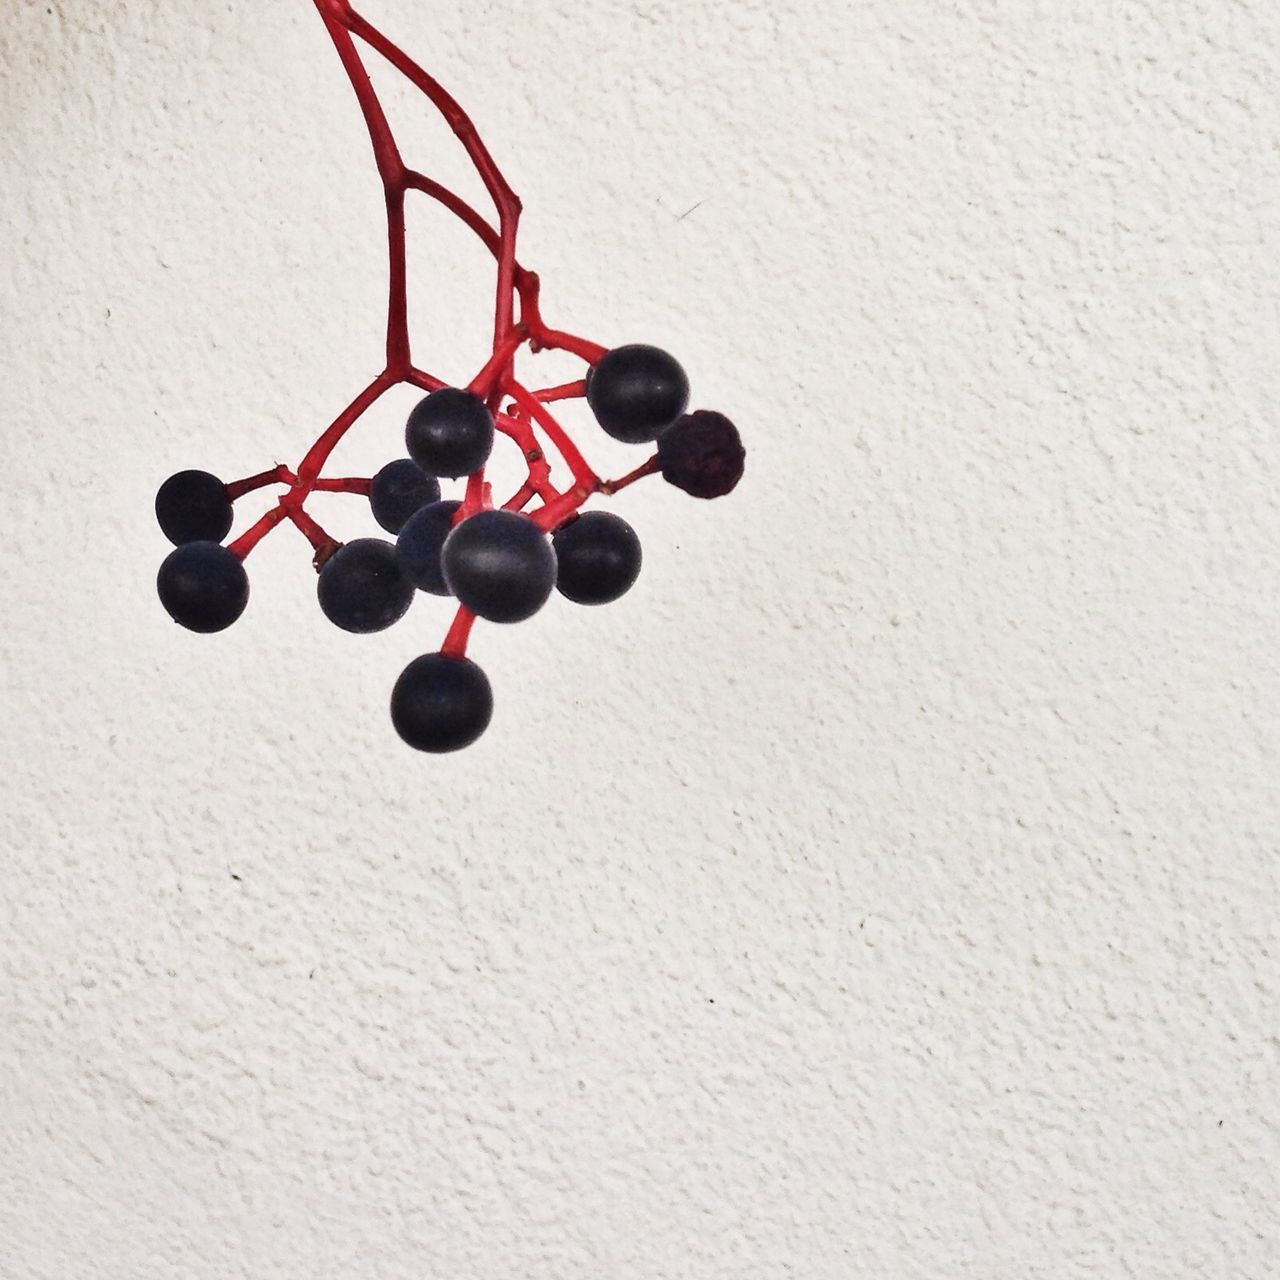 fruit, hanging, indoors, low angle view, decoration, still life, wall - building feature, close-up, no people, food and drink, freshness, healthy eating, food, balloon, bunch, day, cherry, copy space, red, ripe